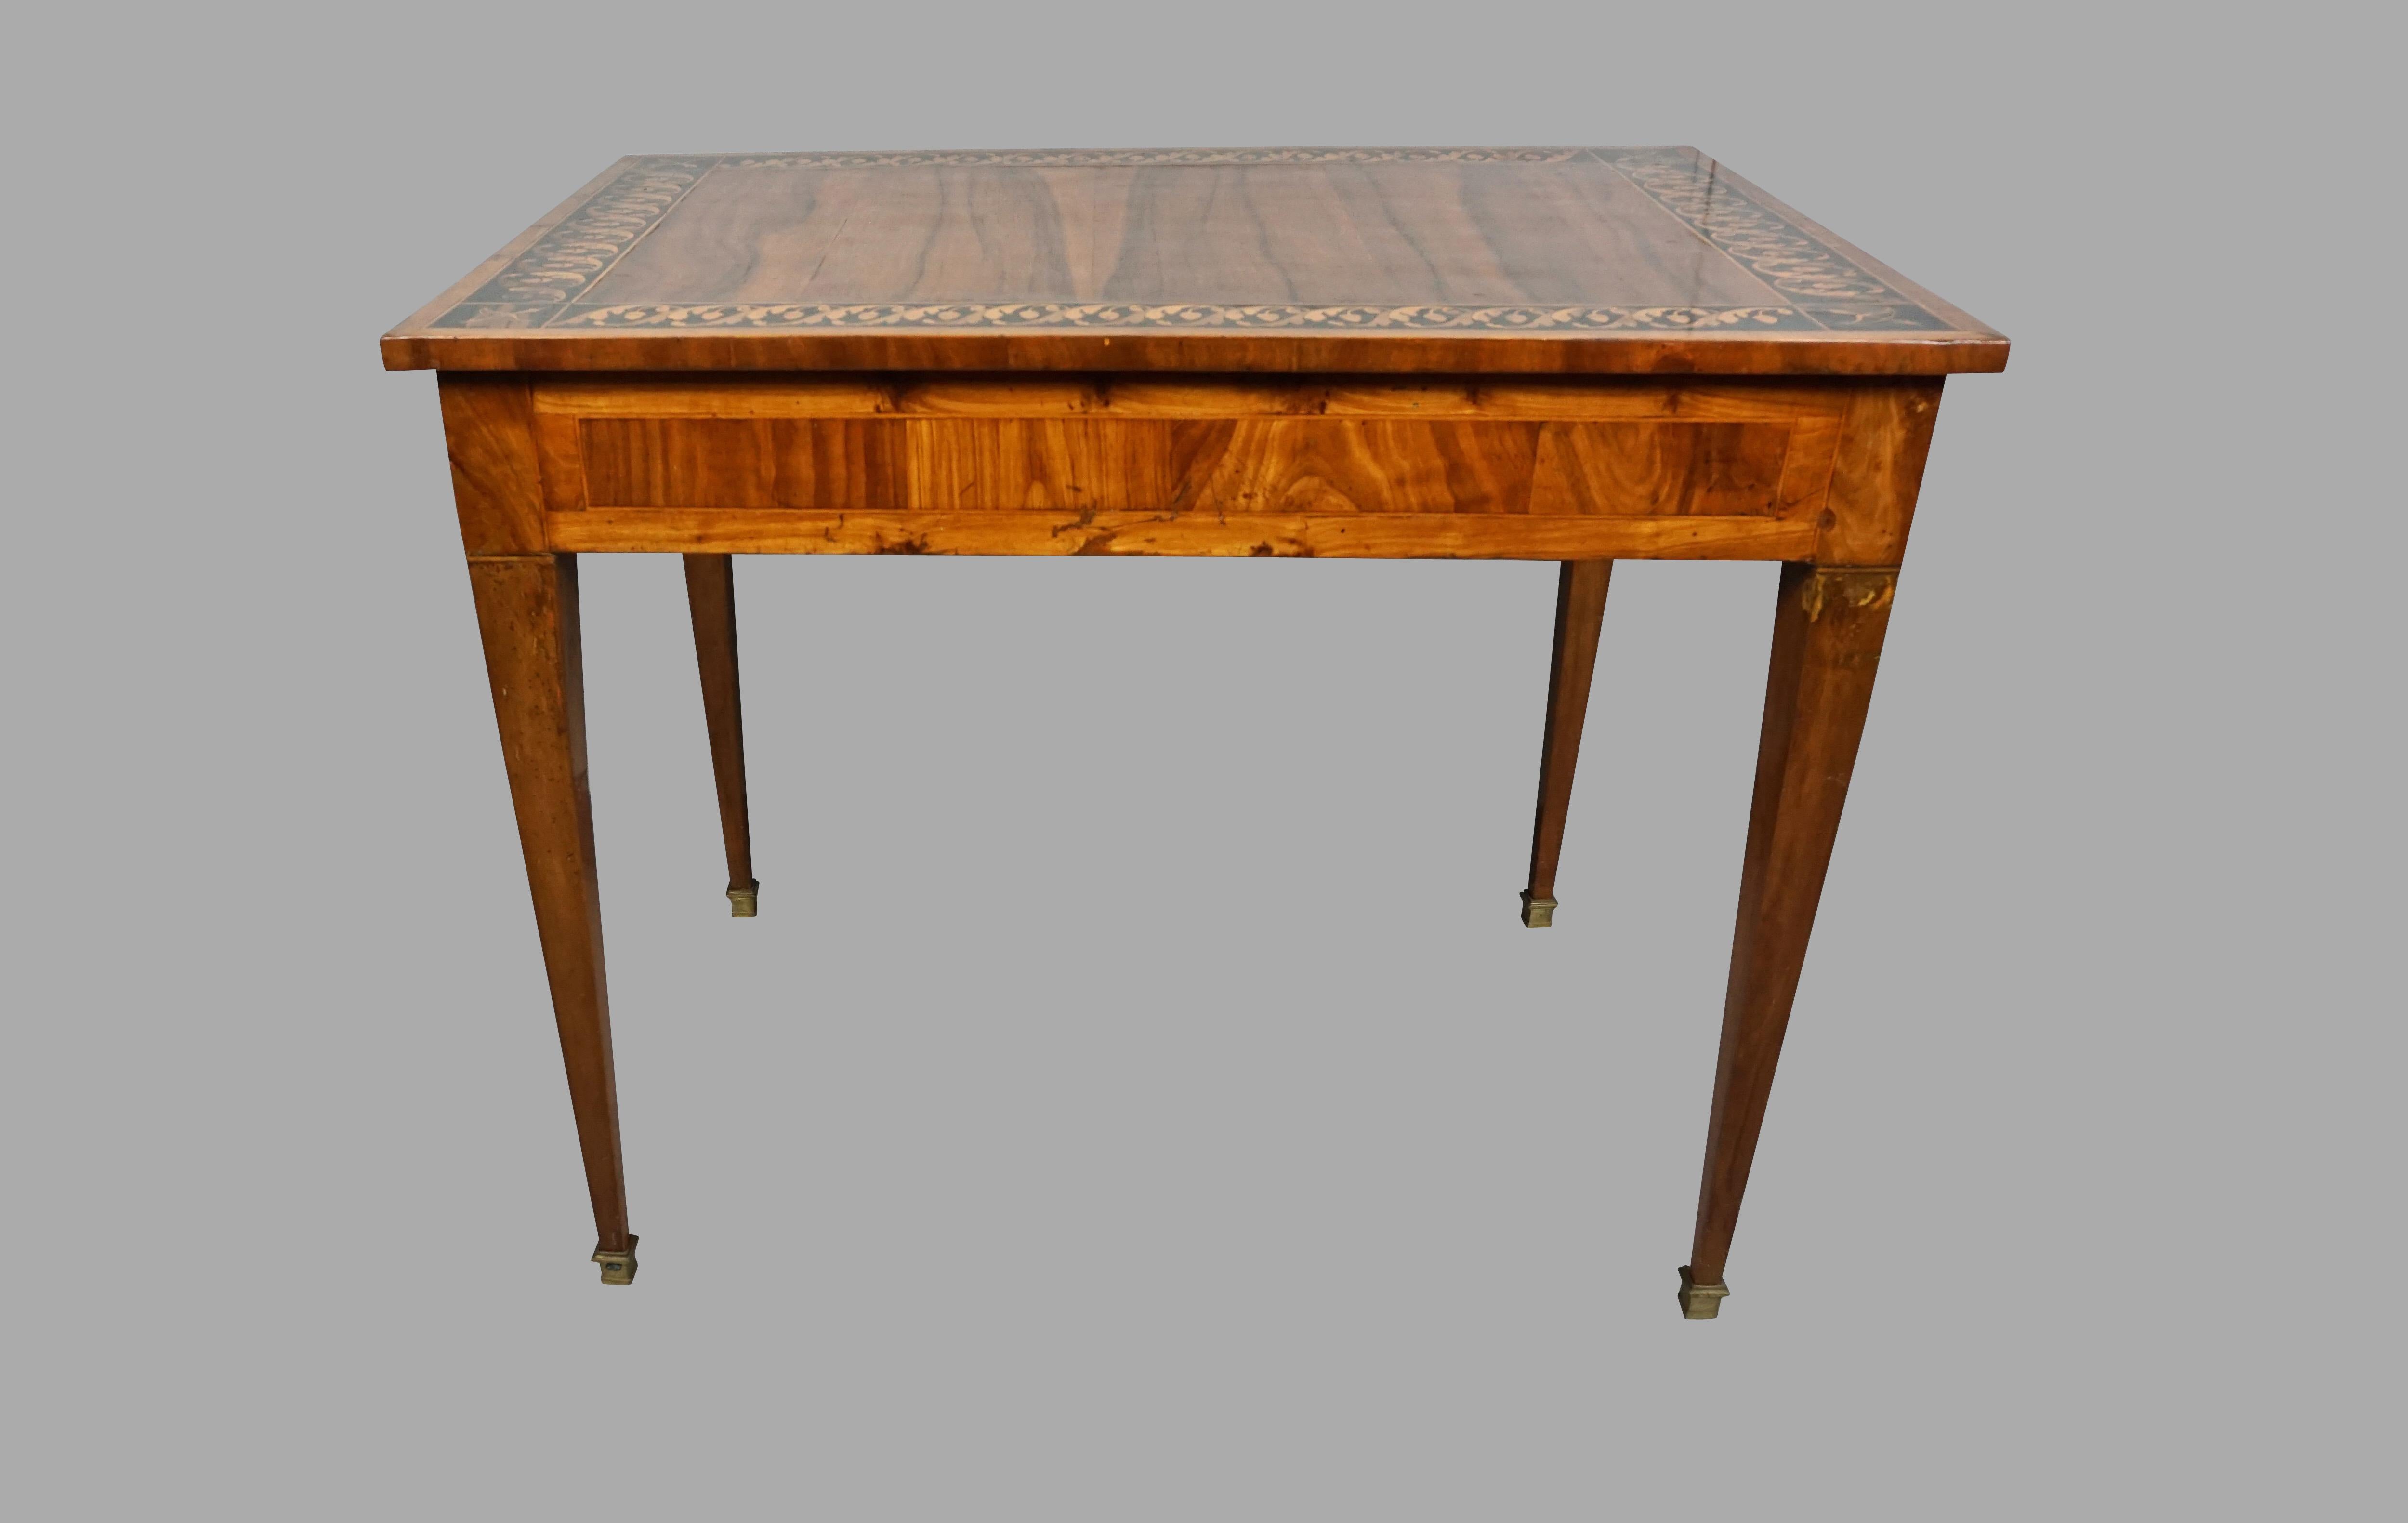 A very pretty Italian inlaid walnut writing table, the well-figured top with acorn and oak leaf crossbanding and bow and arrow decoration at the corners, over a single drawer, supported on square tapered legs ending in block feet, circa 1790.